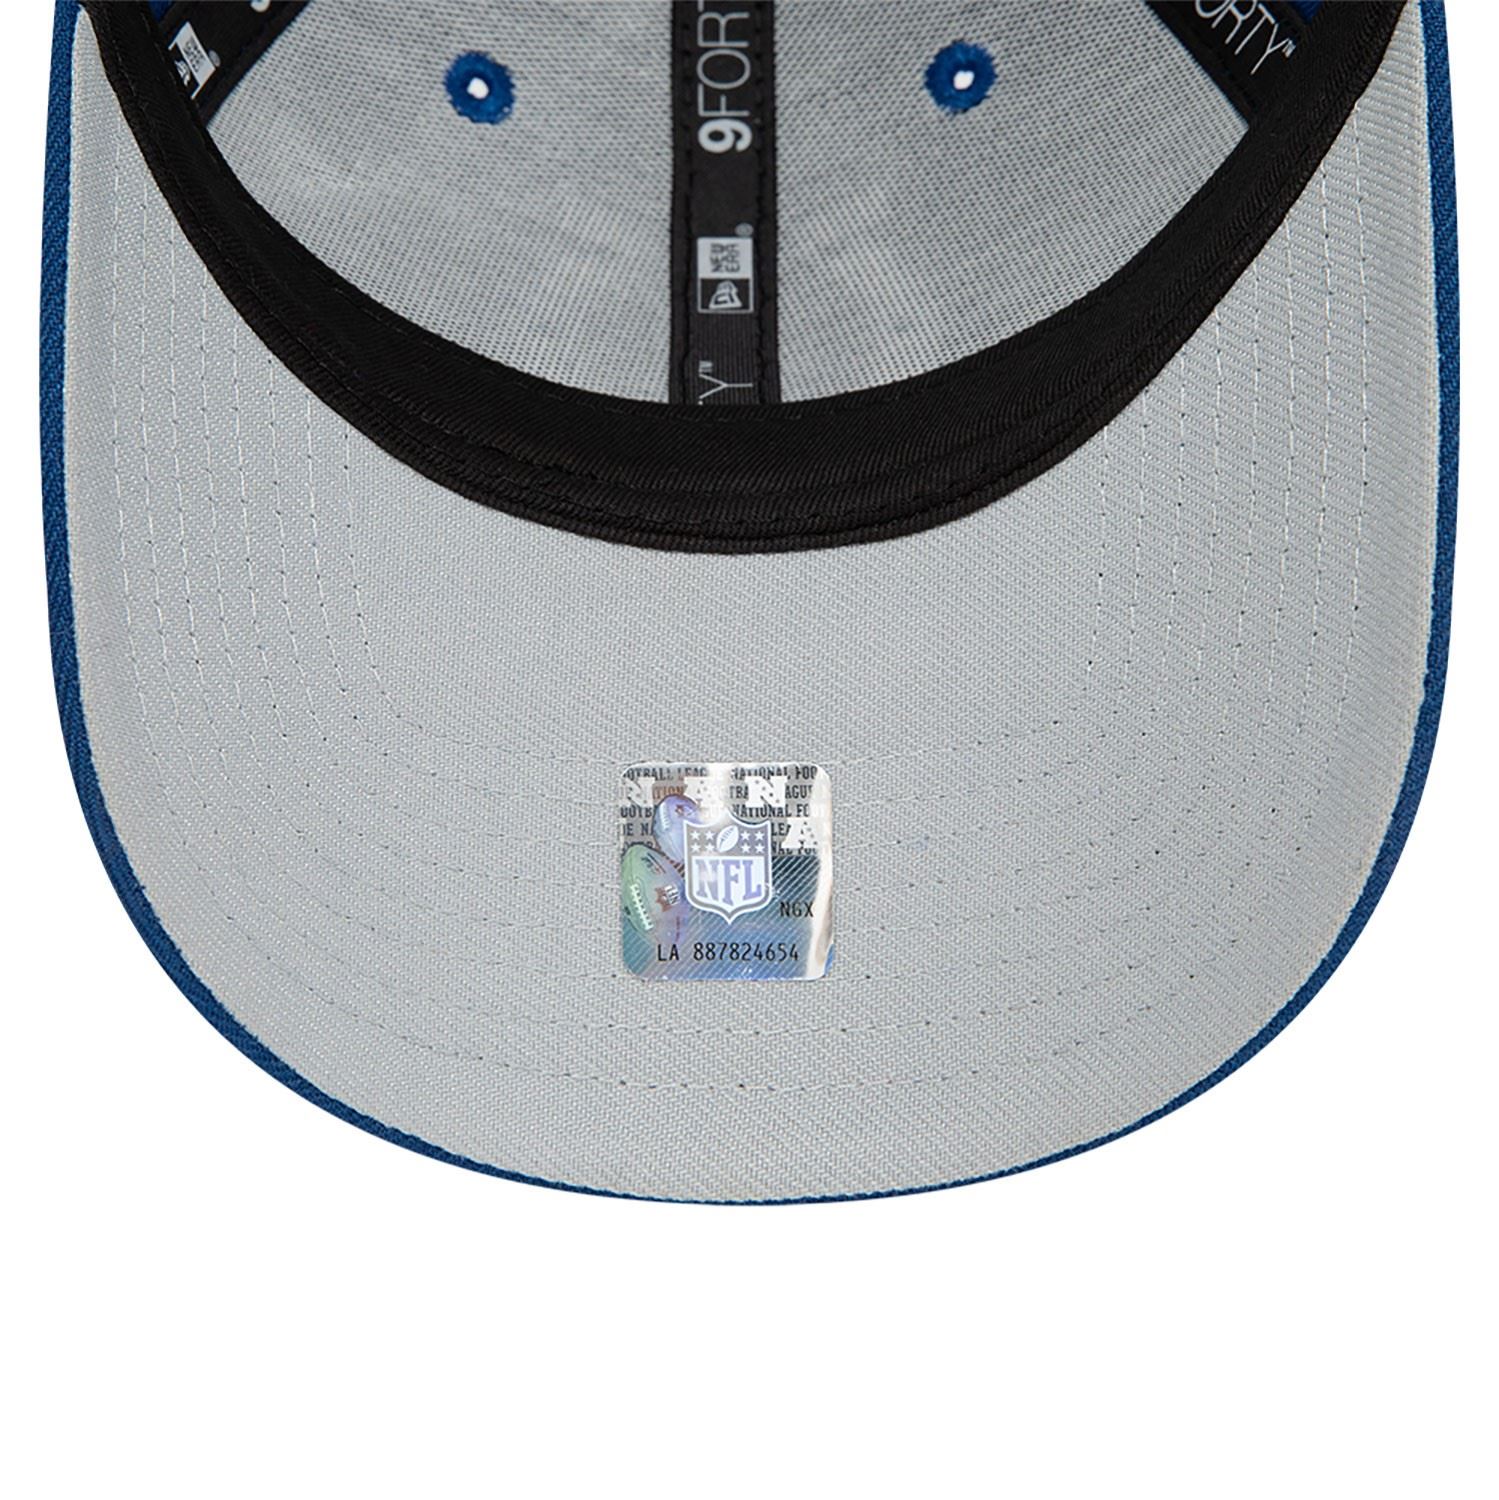 Indianapolis Colts NFL The League Blue 9Forty Adjustable Cap New Era